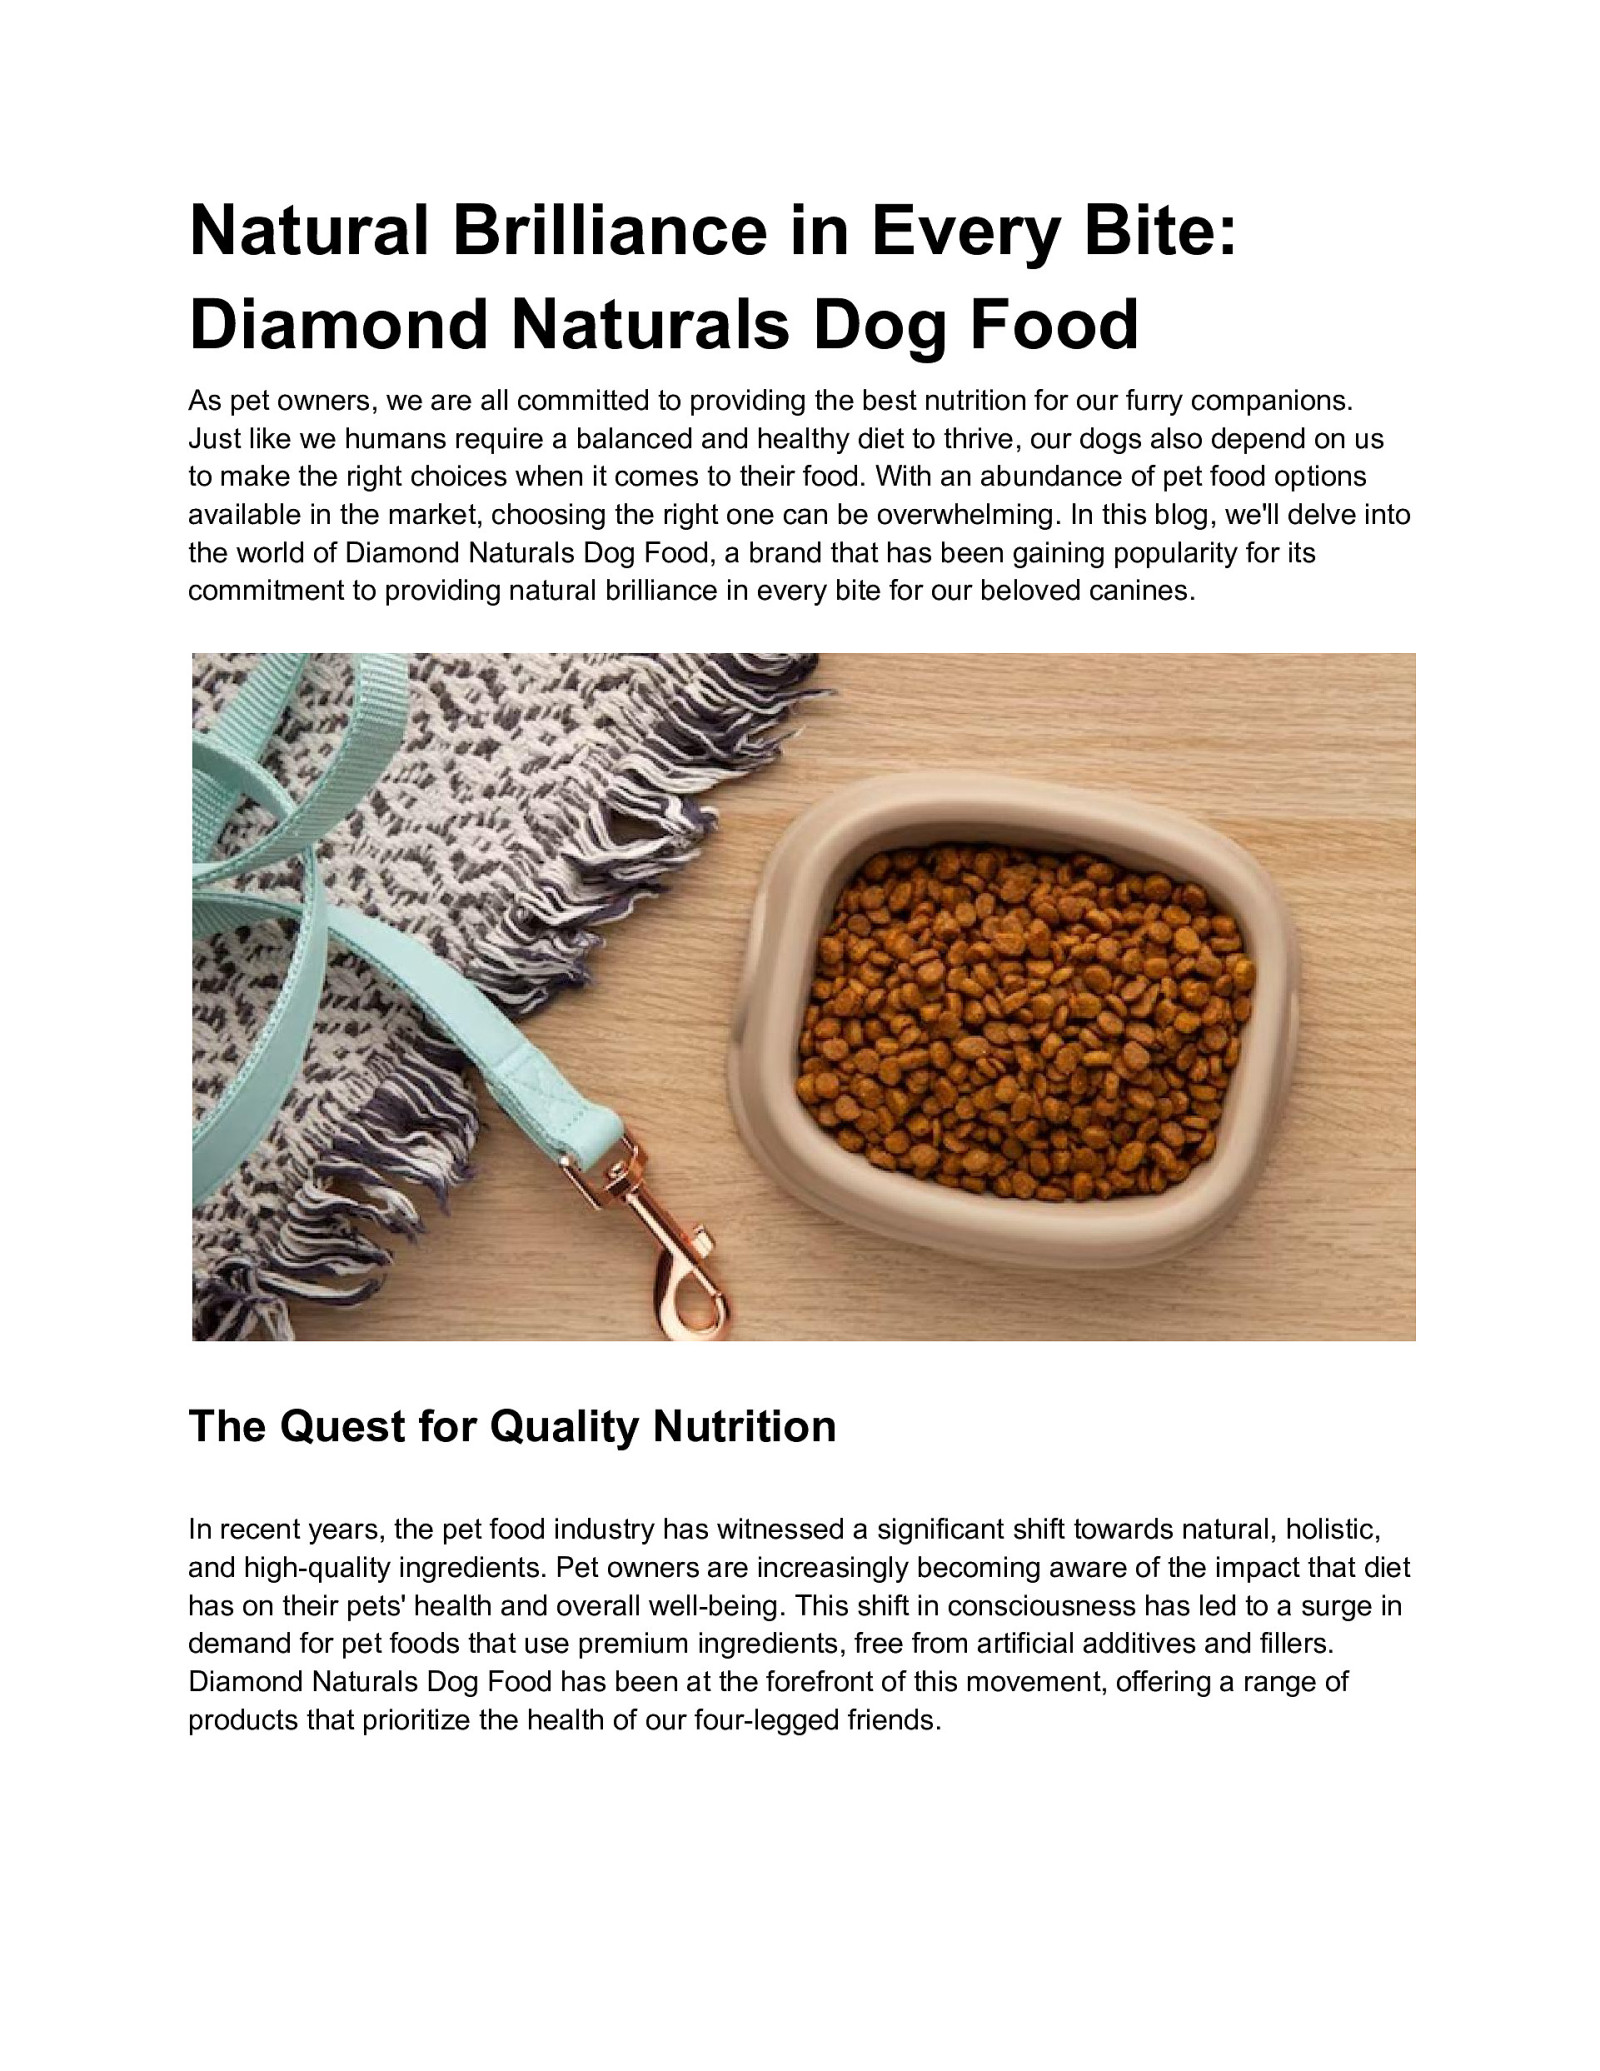 Diamond naturals dog food is a brand of dog food produced by Diamond. They offer a range of dry and wet food options for dogs of all life stages.